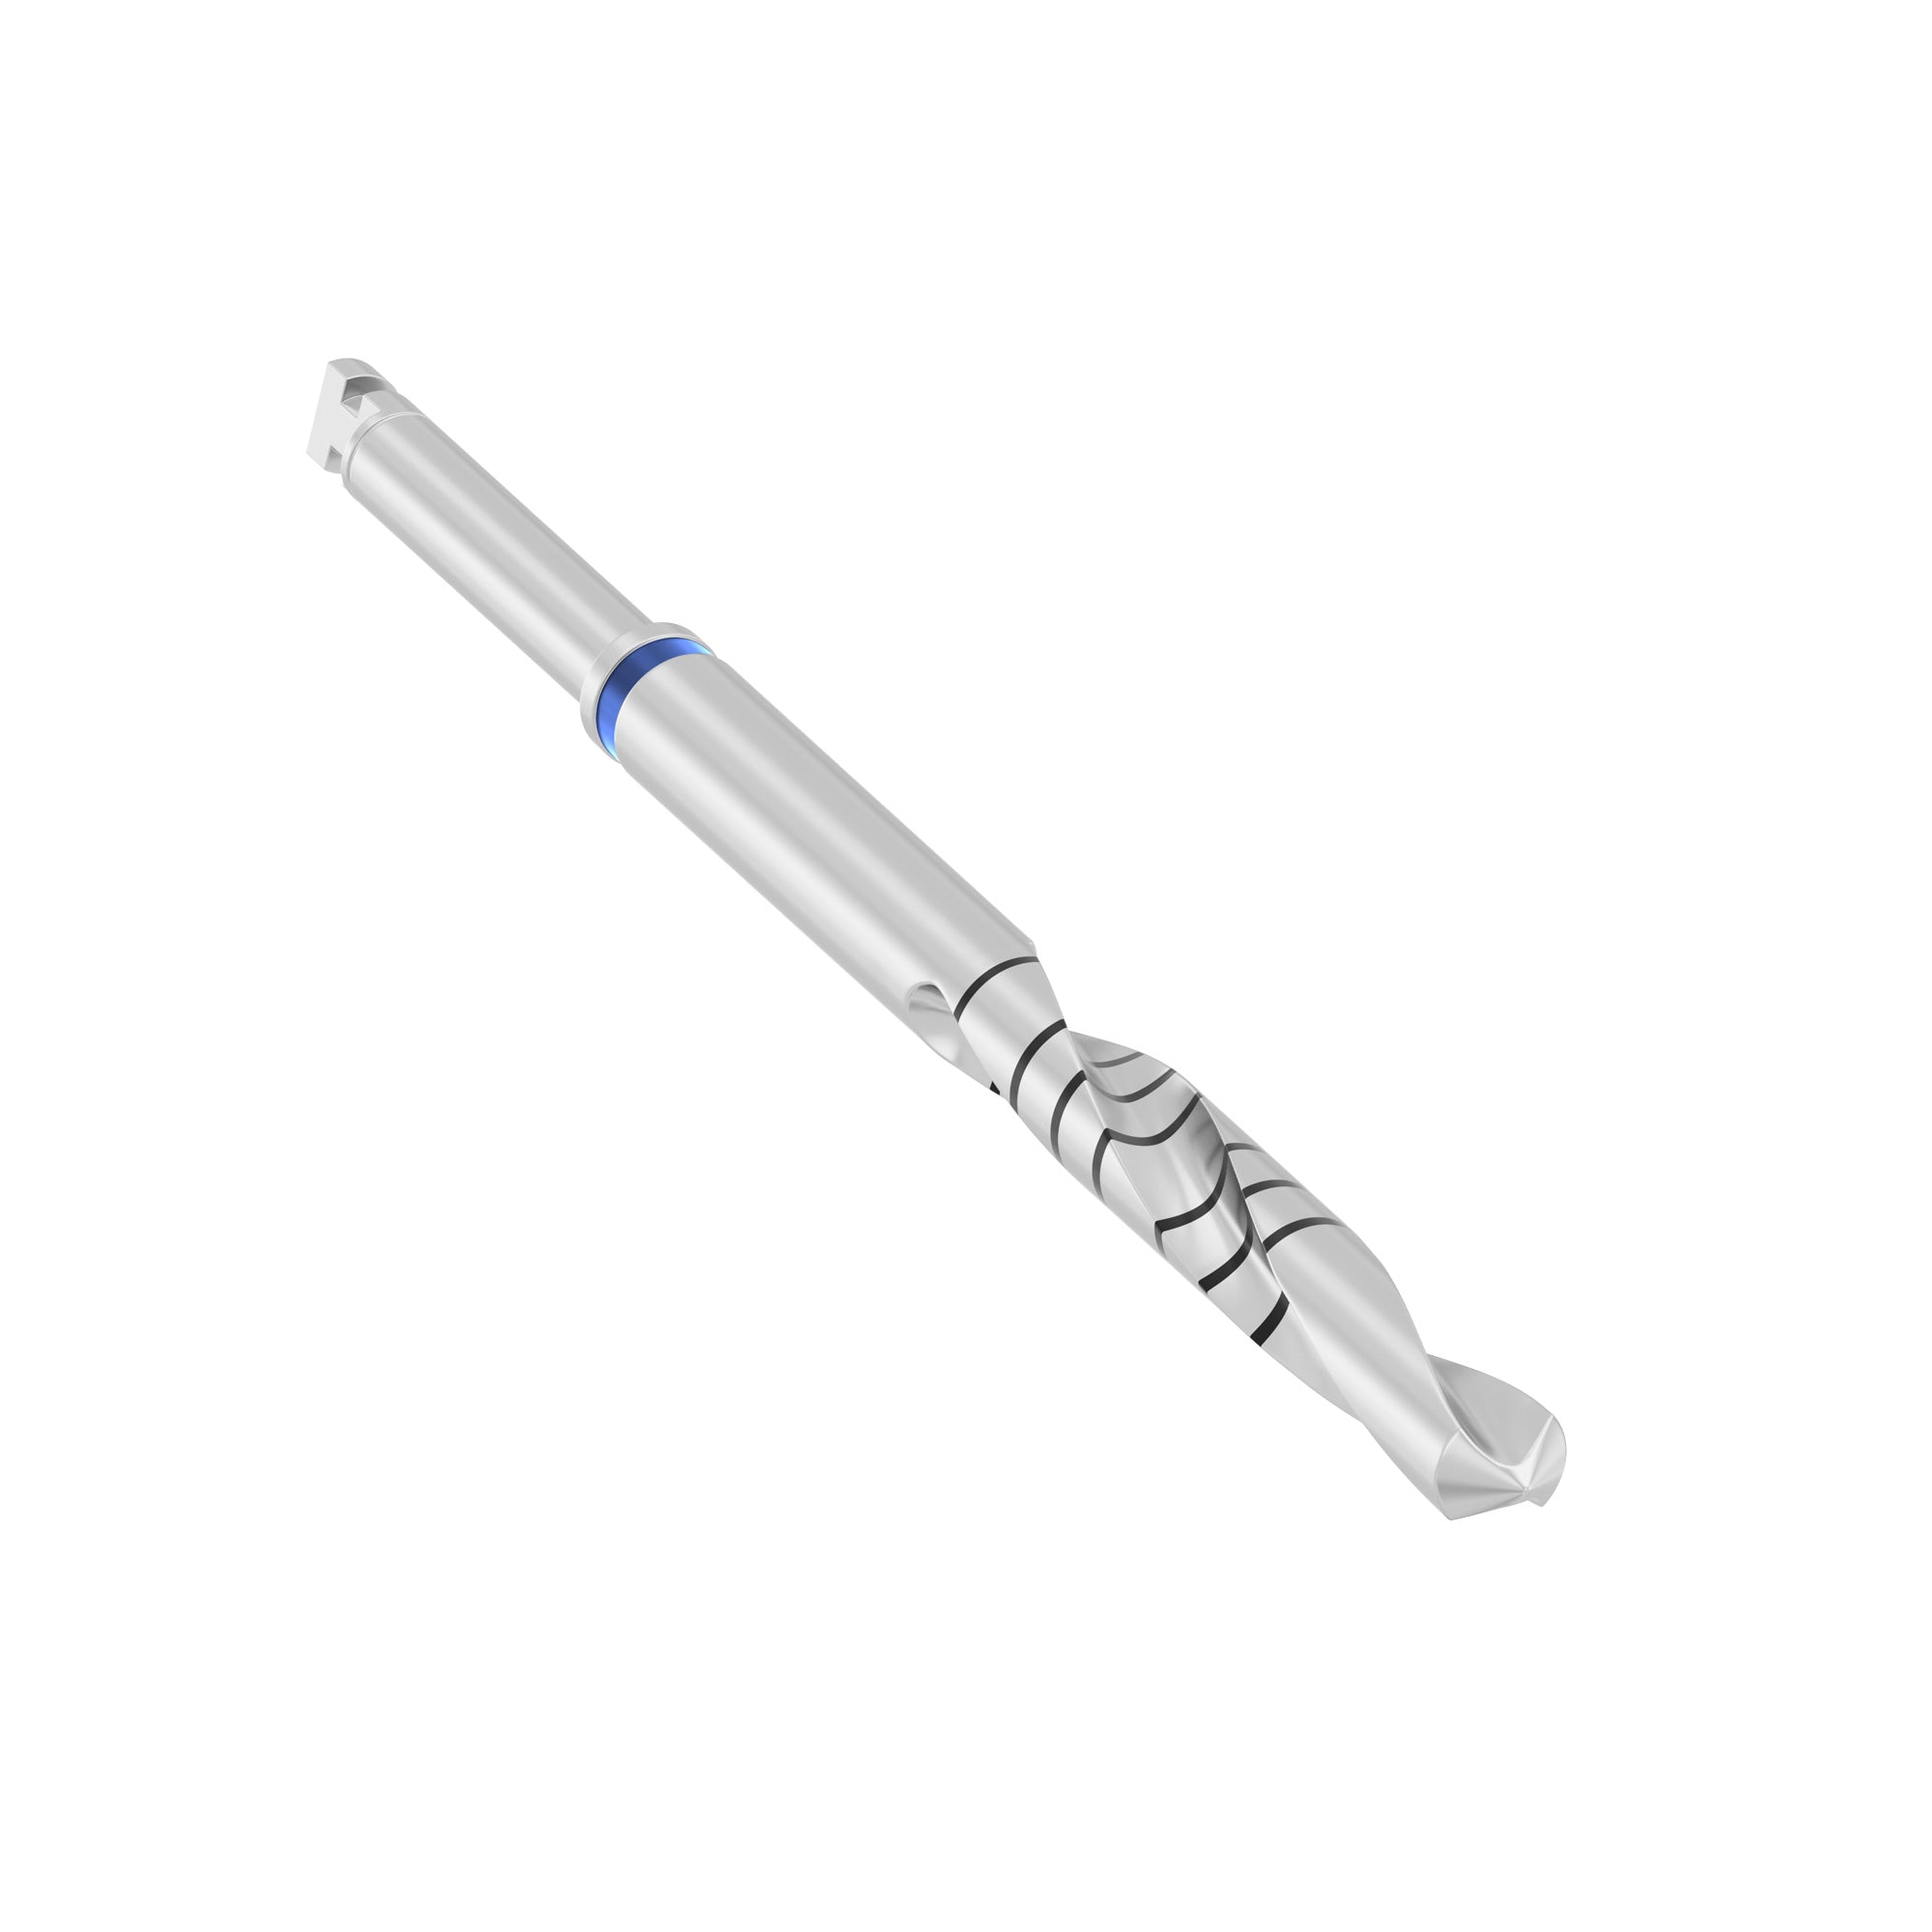 DSI Surgical Implantology Cylindrical Drill For Basal/Ptery Implant L43mm